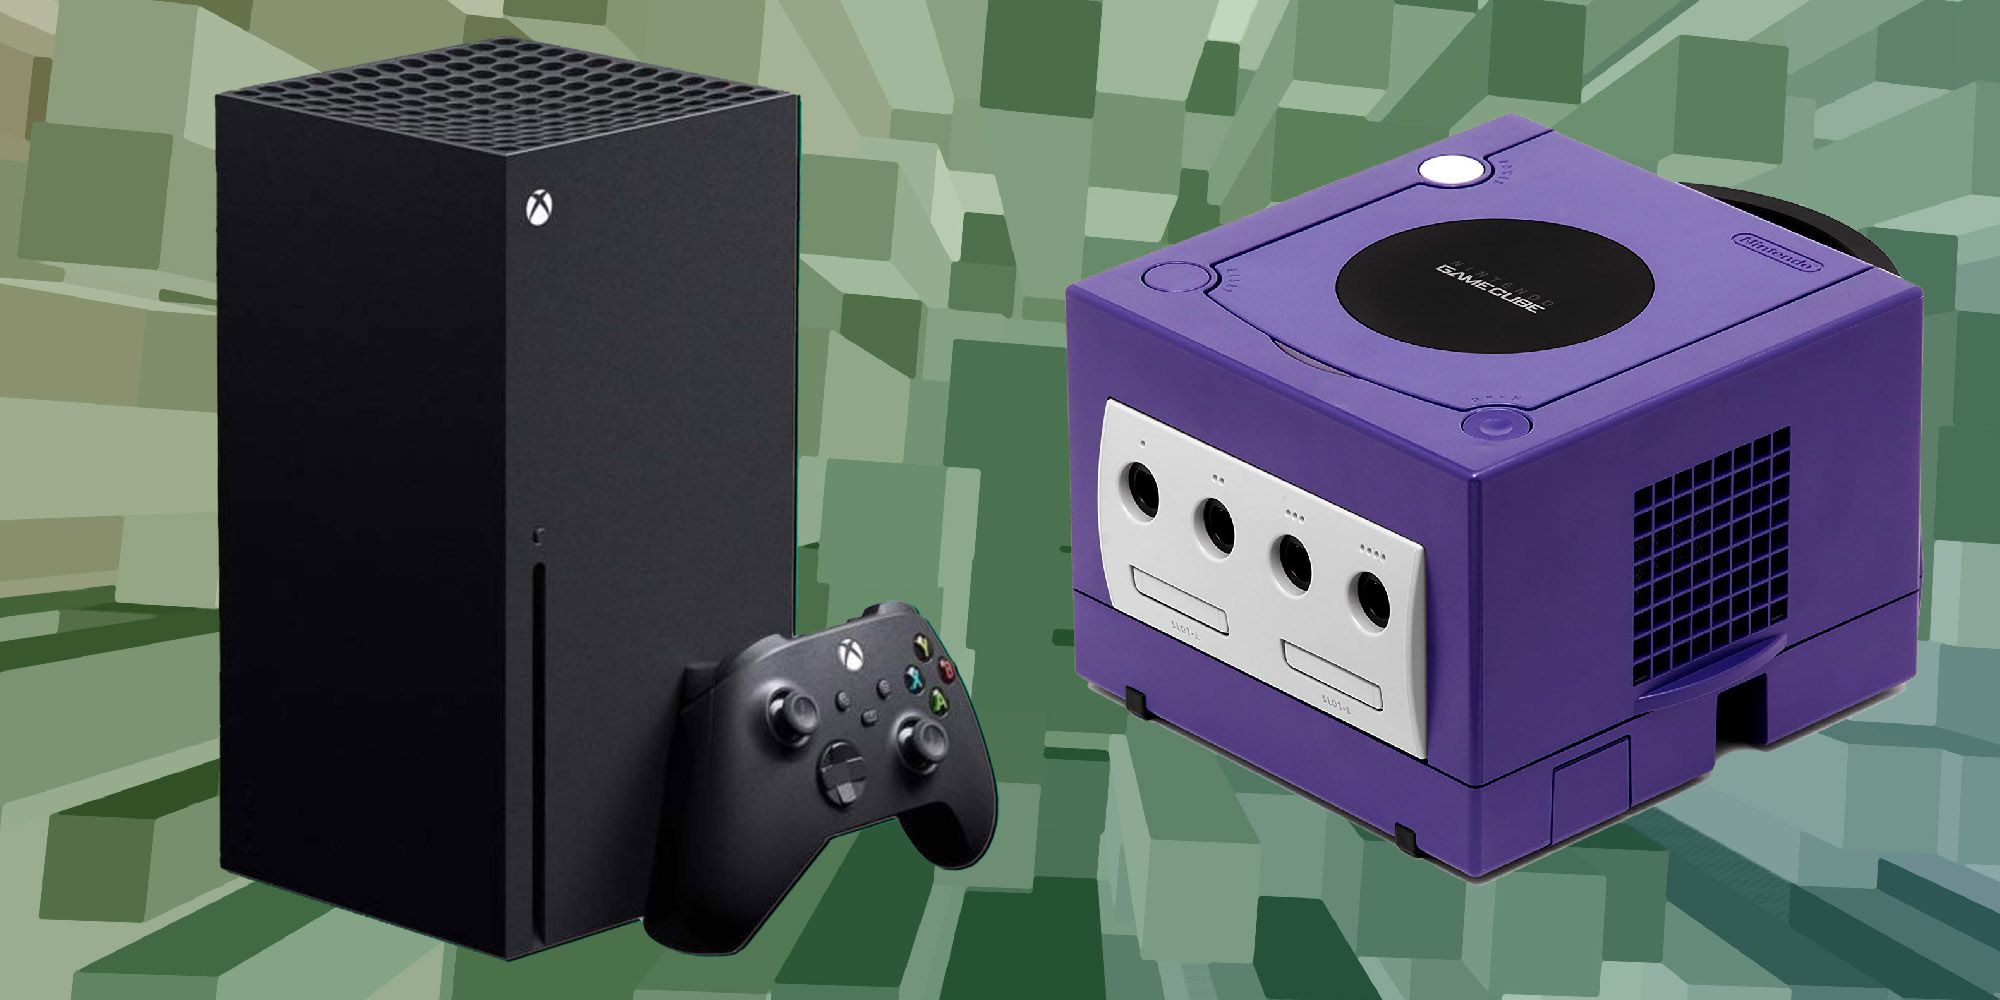 Pearly fusion Creek Xbox Series X: The GameCube Is No Longer Alone